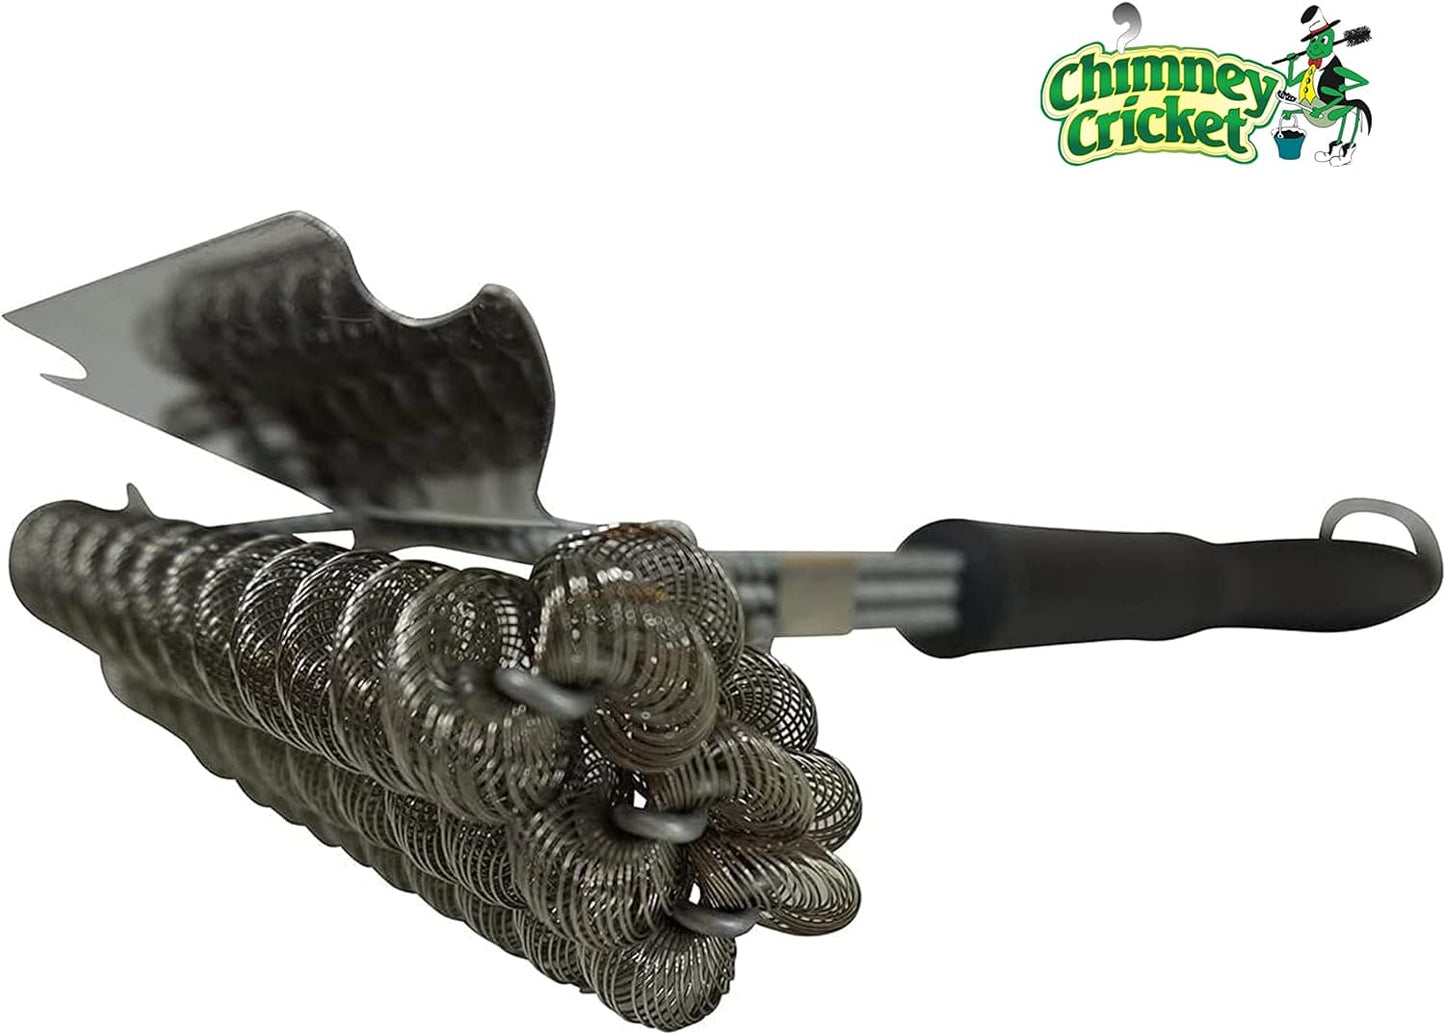 Chimney Cricket BBQ Grill Brush & Scraper | Bristle-Free, Safe, & Deep Cleaning Scrubber - 18" - Best for Barbecue Grill Cleaning